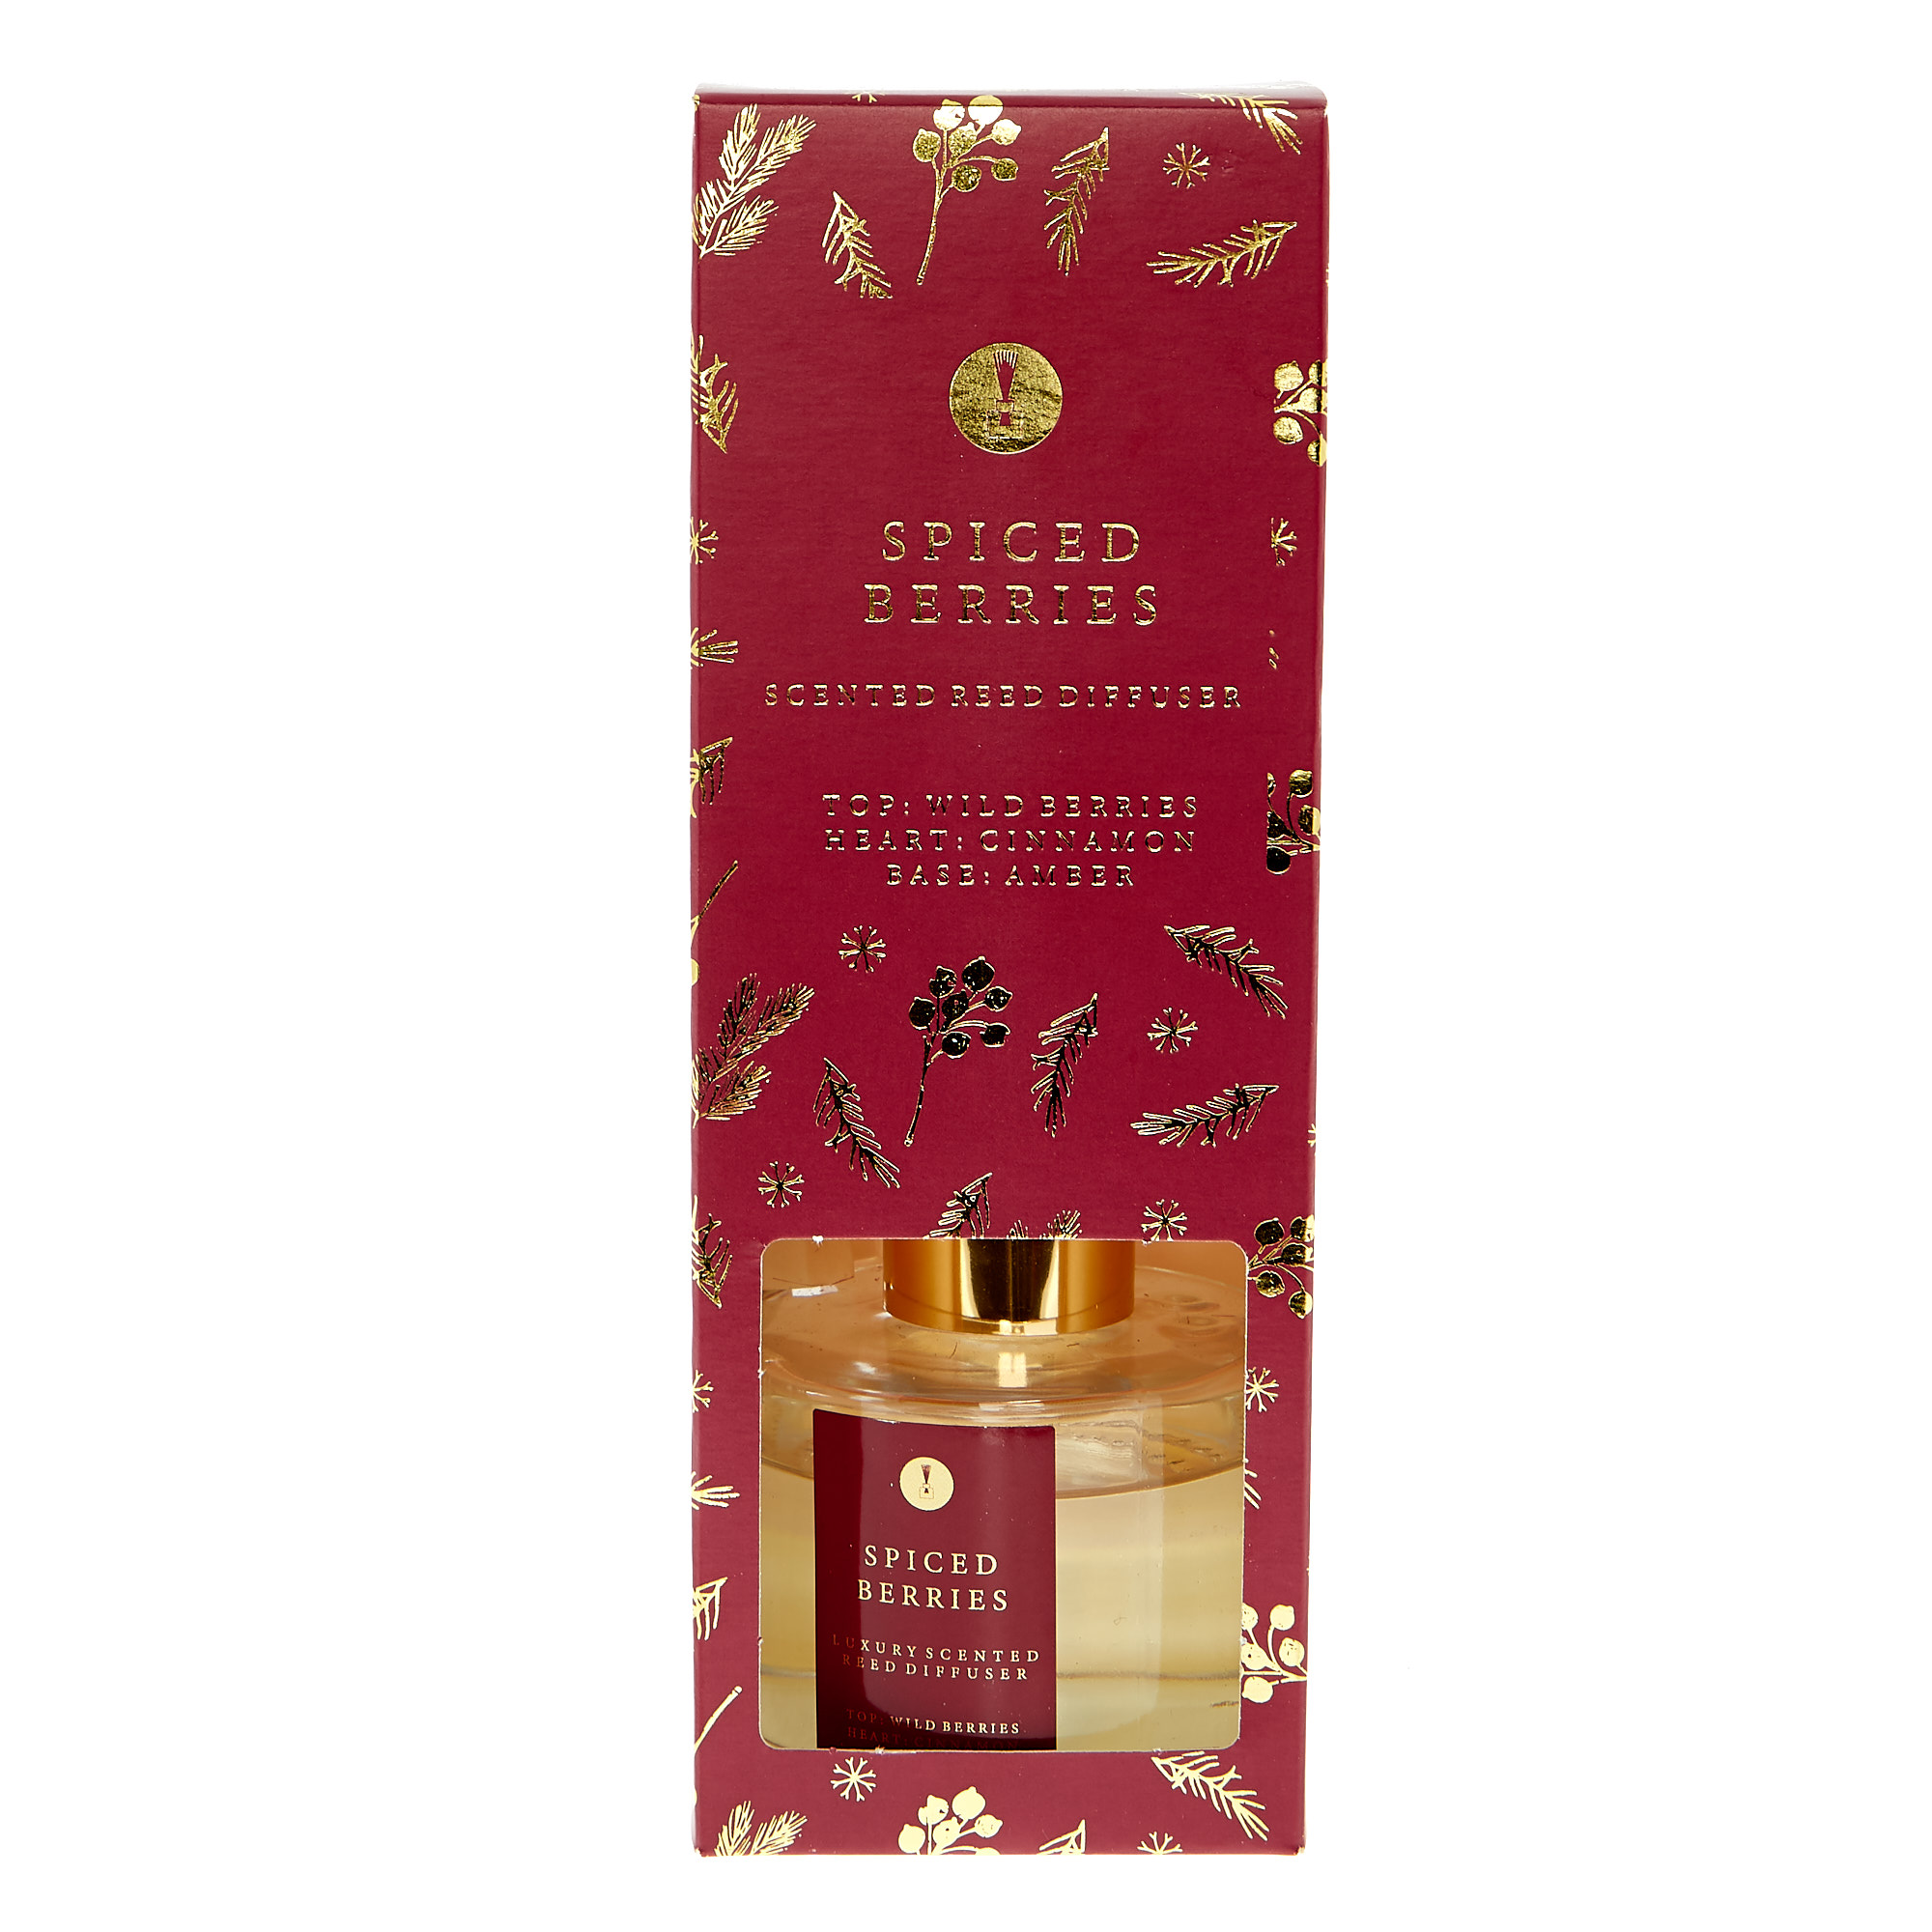 Spiced Berries Scented Reed Diffuser